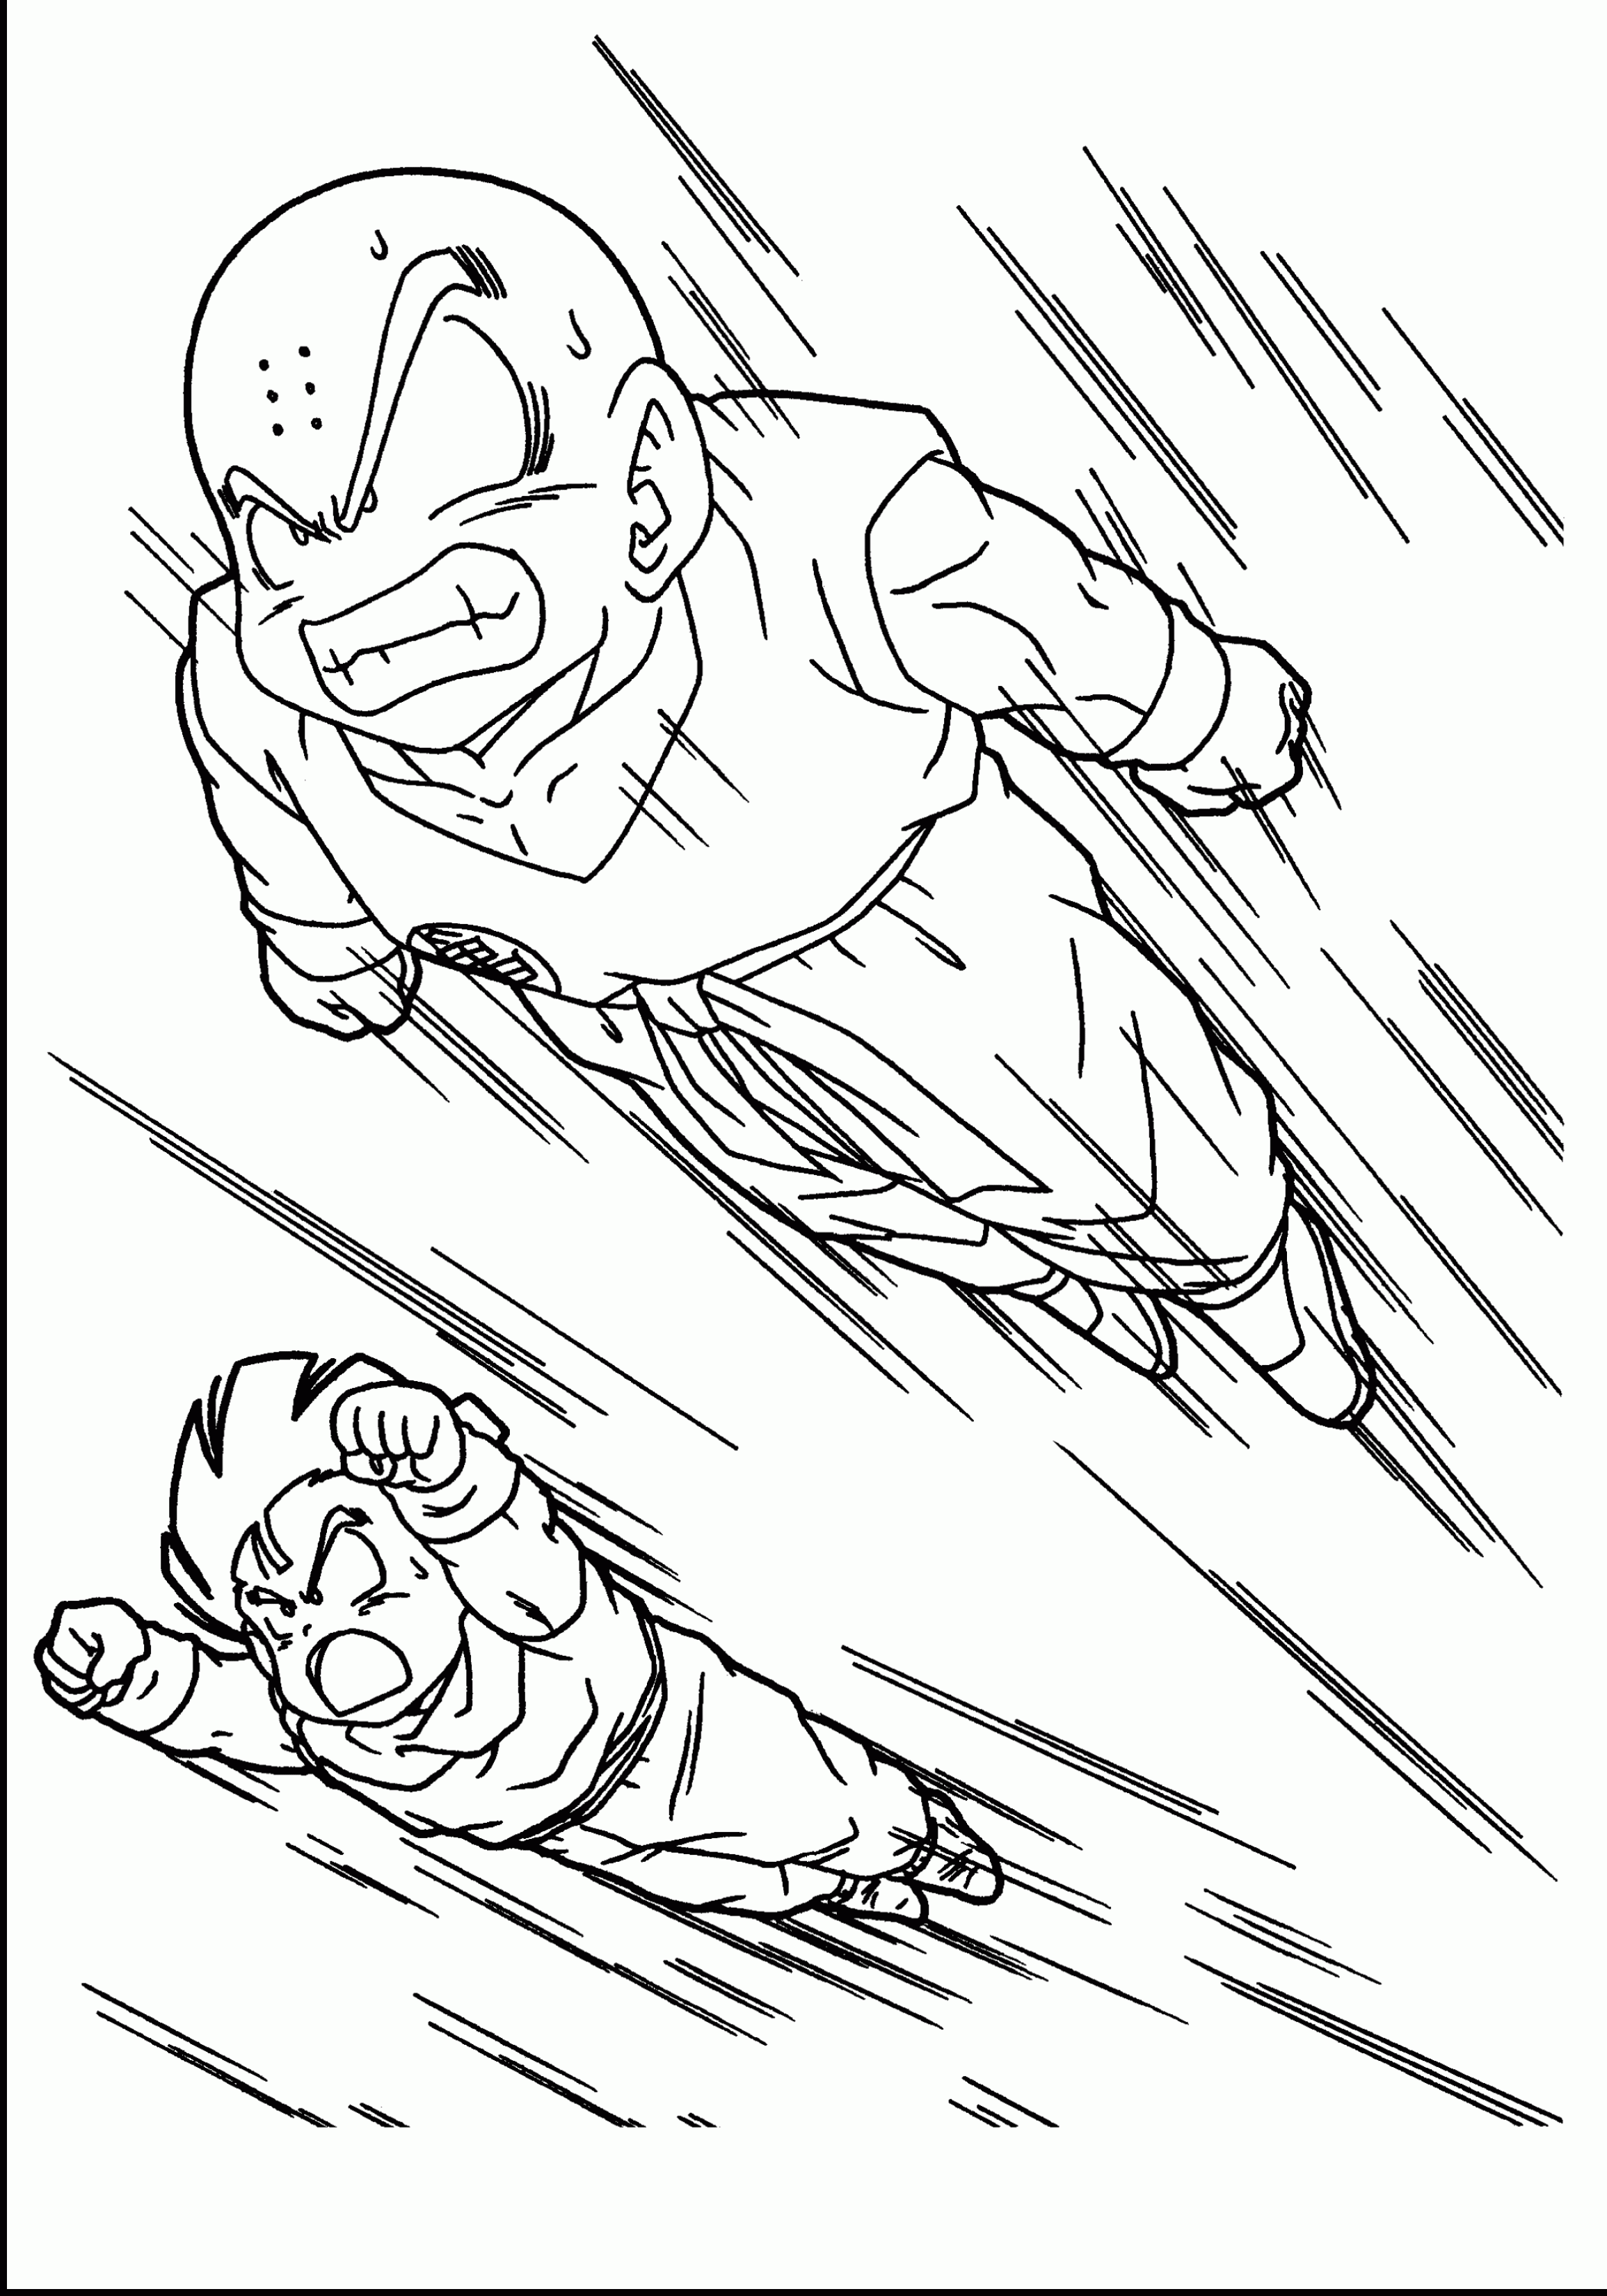 Dragon Ball Z coloring page to download : Krilin and Gohan